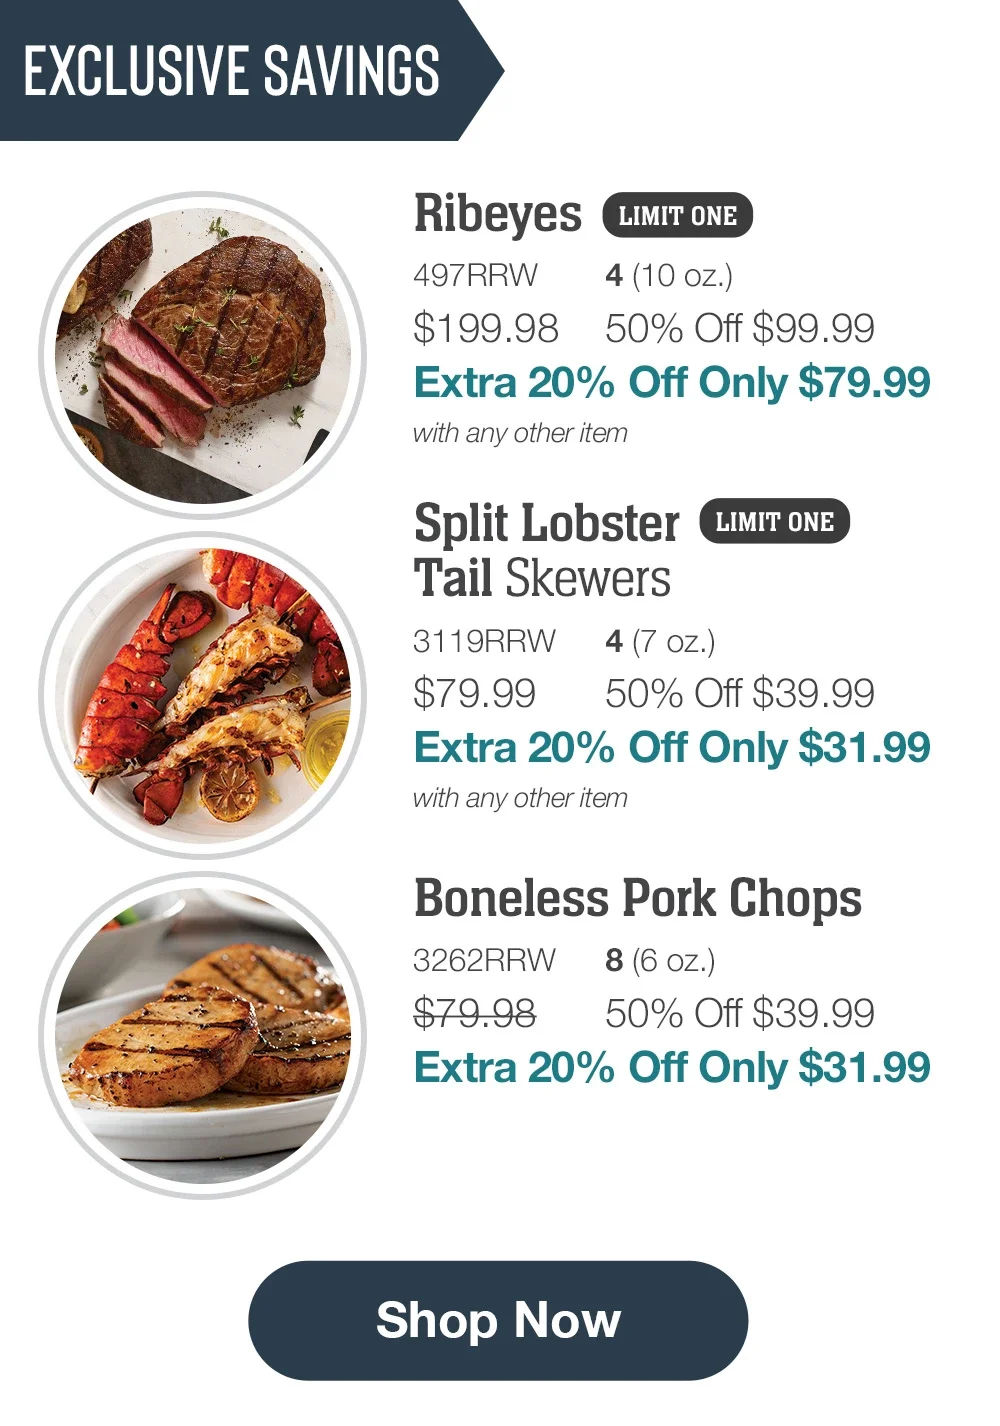 EXCLUSIVE SAVINGS | Ribeyes LIMIT ONE - 497RRW 4(10 oz.) \\$199.98 50% Off \\$99.99 Extra 20% Off Only \\$79.99 with any other item | Split Lobster Tail Skewers LIMIT ONE - 3119RRW 4(7 oz.) \\$79.99 50% Off \\$39.99 Extra 20% Off Only \\$31.99 with any other item | Boneless Pork Chops - 3262RRW 8 (6 oz.) \\$79.98 50% Off \\$39.99 Extra 20% Off Only \\$31.99 || Shop Now